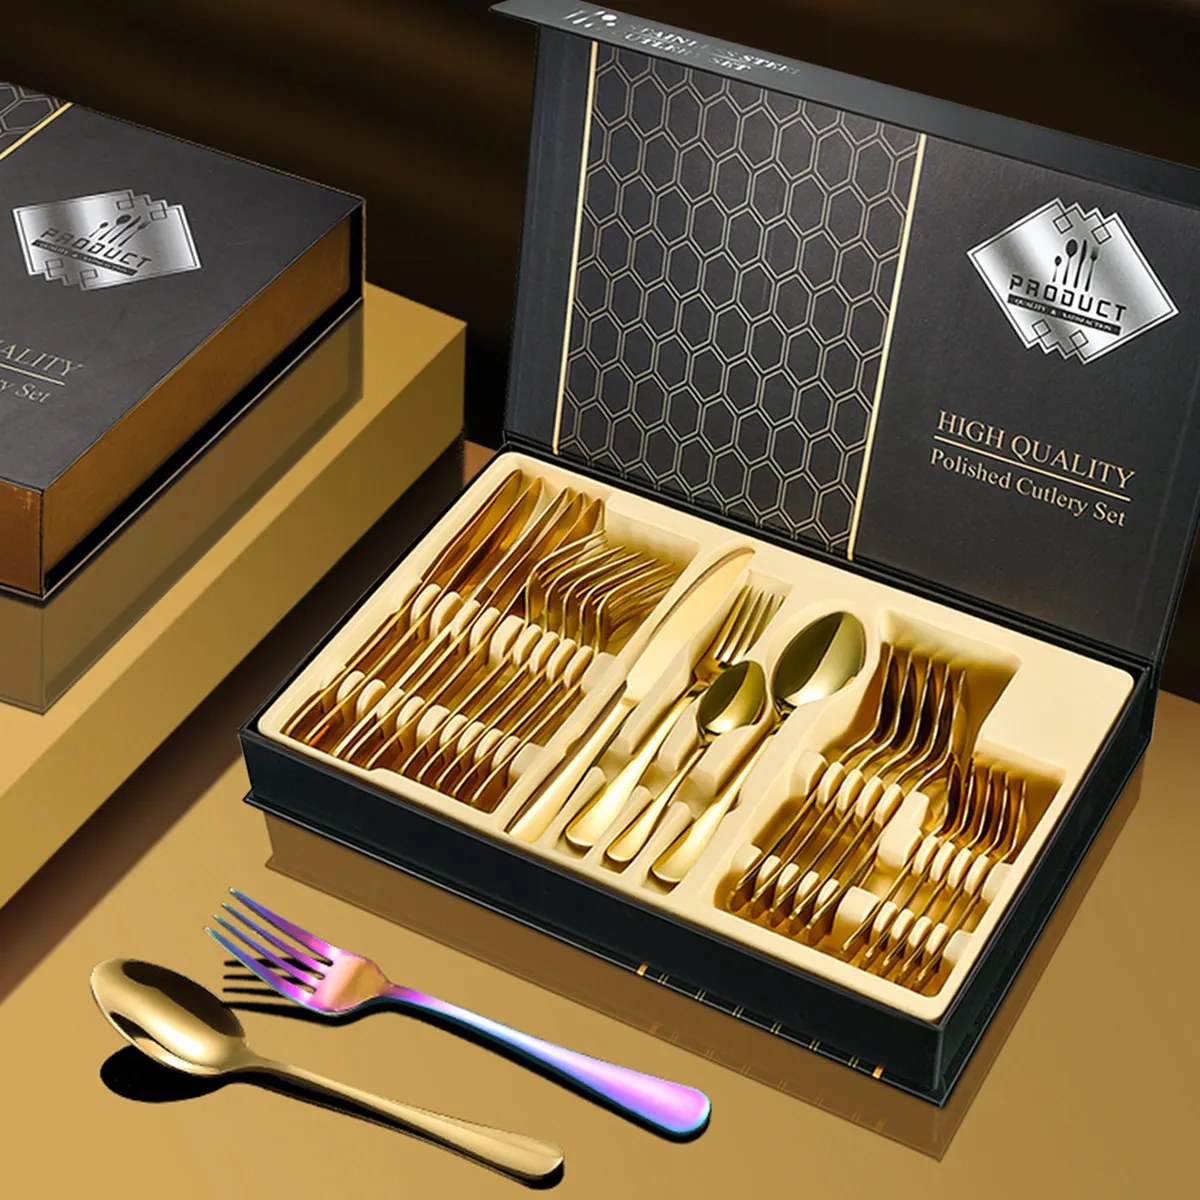 

Luxury Wedding Restaurant Golden Silver Knife Spoon Fork Flatware Royal Doulton Bestek Stainless Steel Cutlery Set With Gift Box, Silver, gold, rose gold, colorful, black, customizable